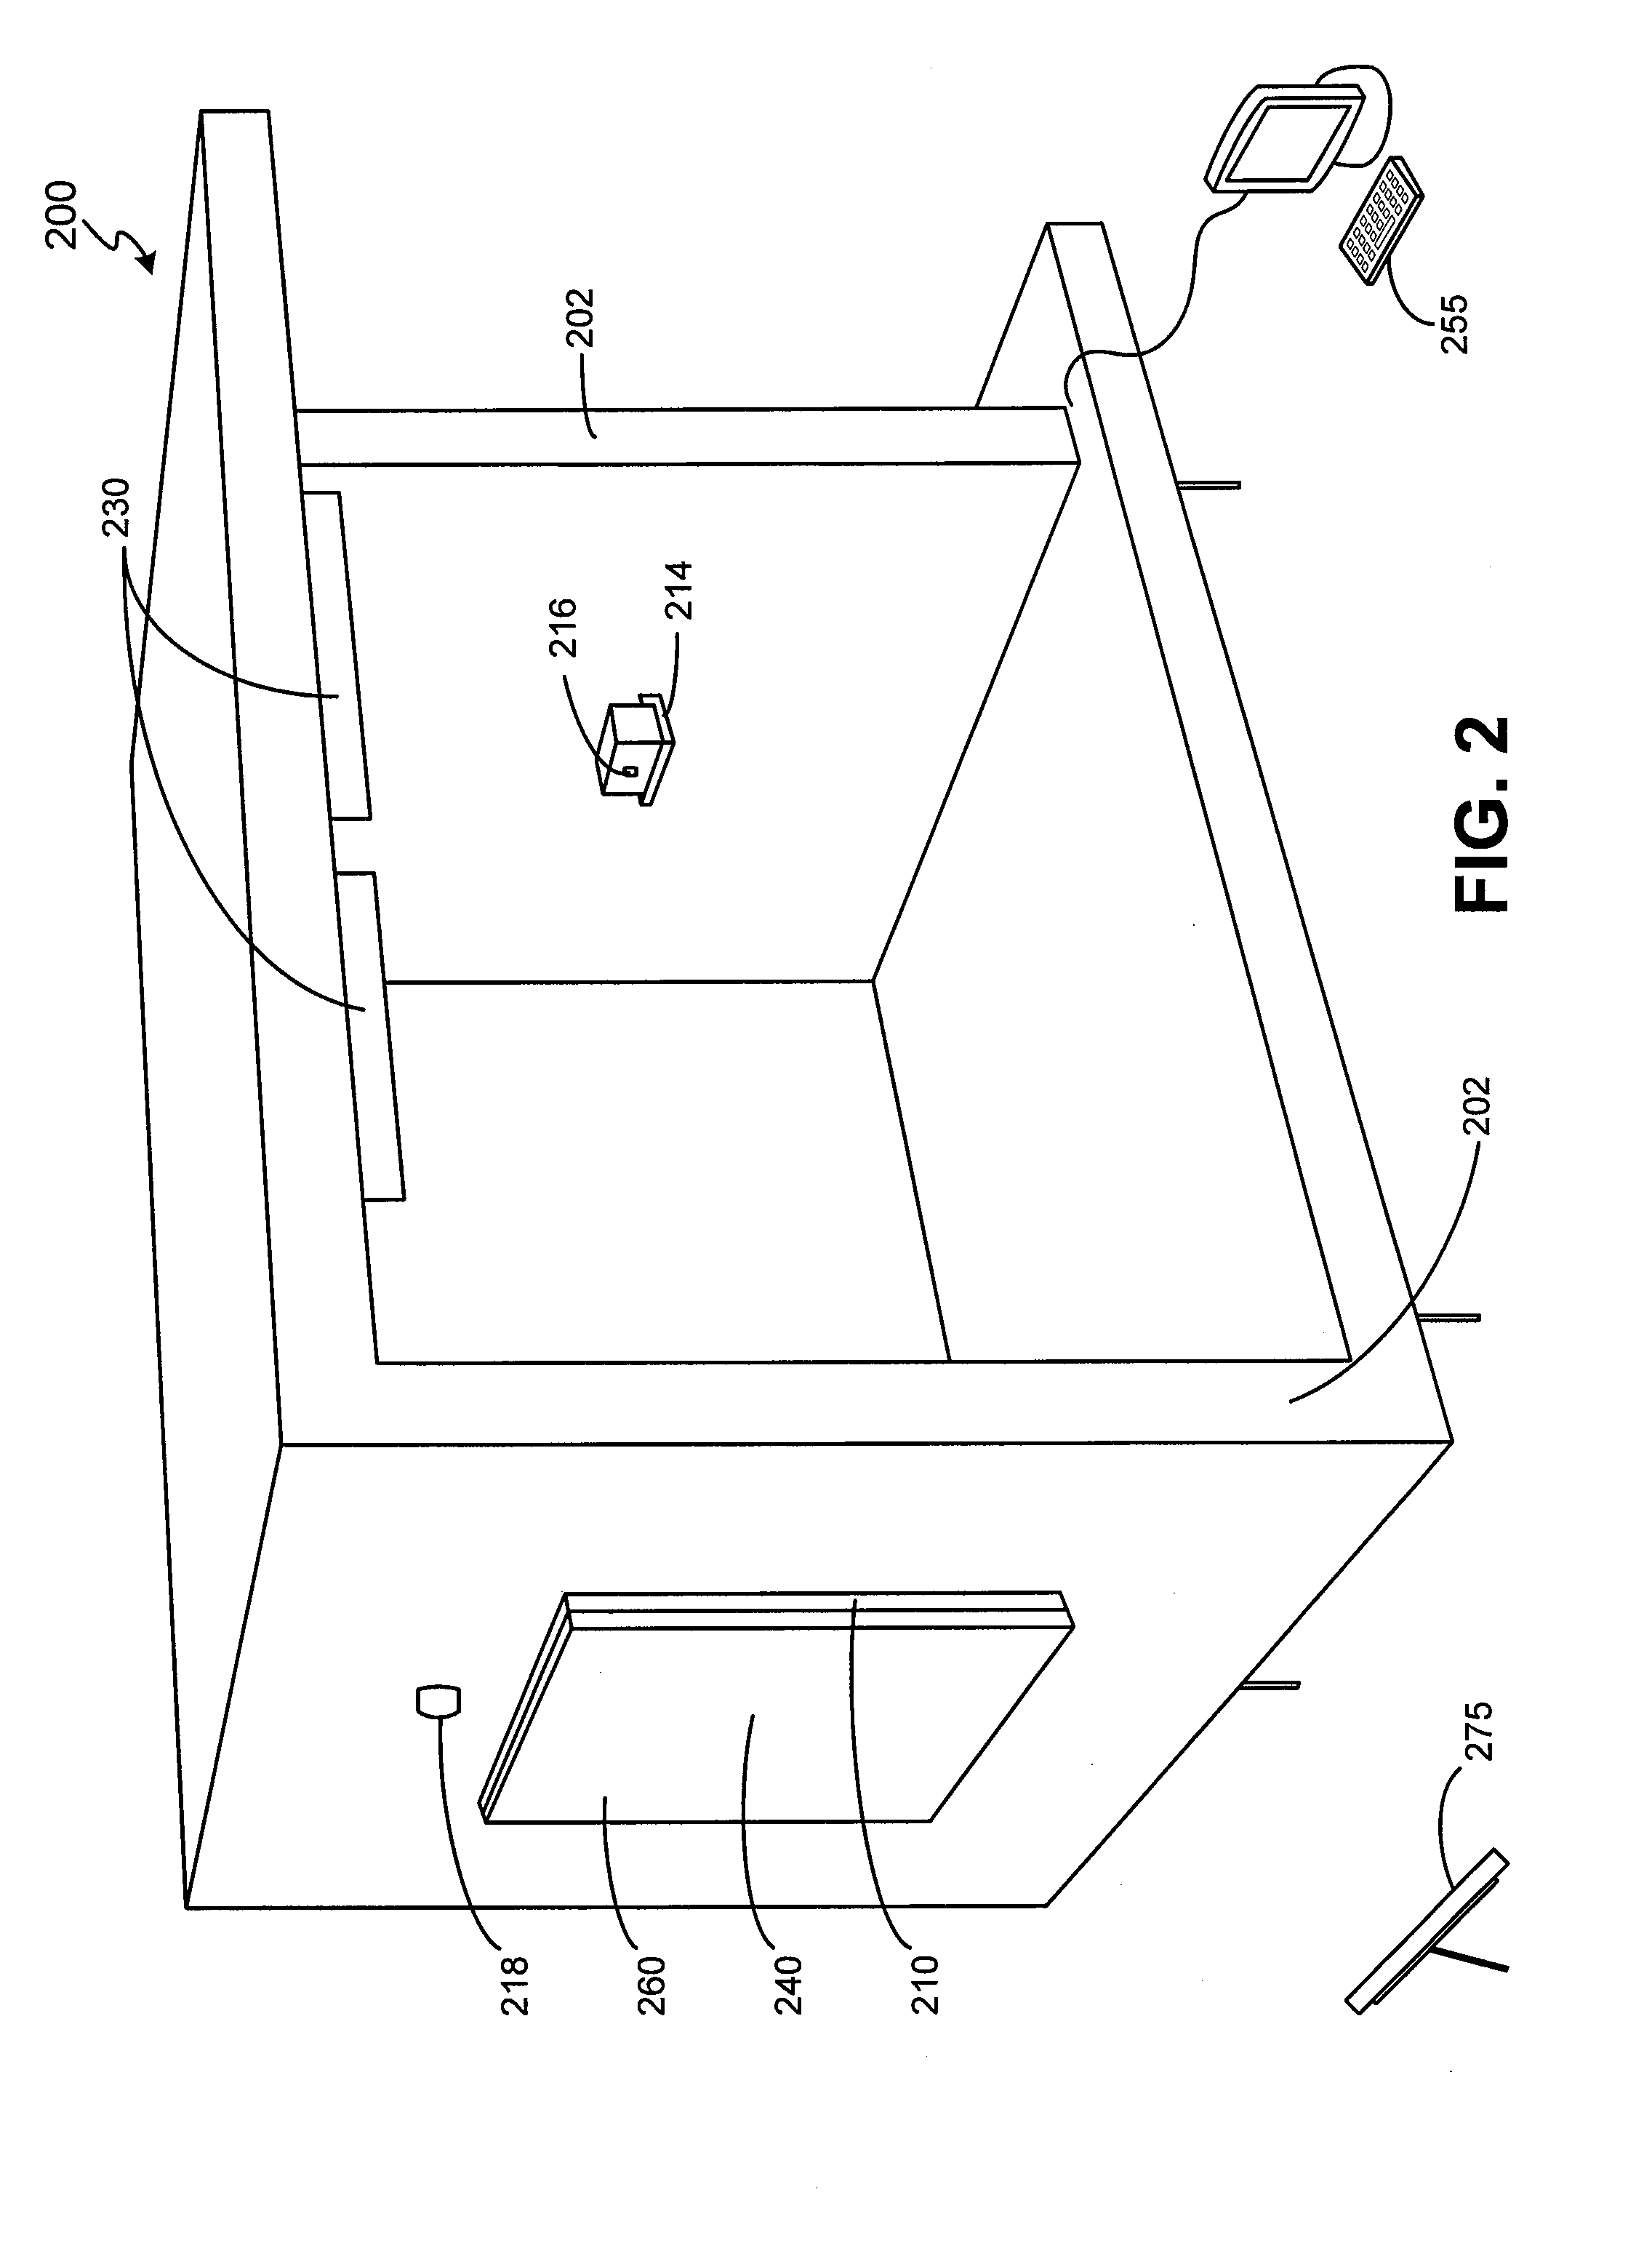 System and method for shade selection using a fabric brightness factor